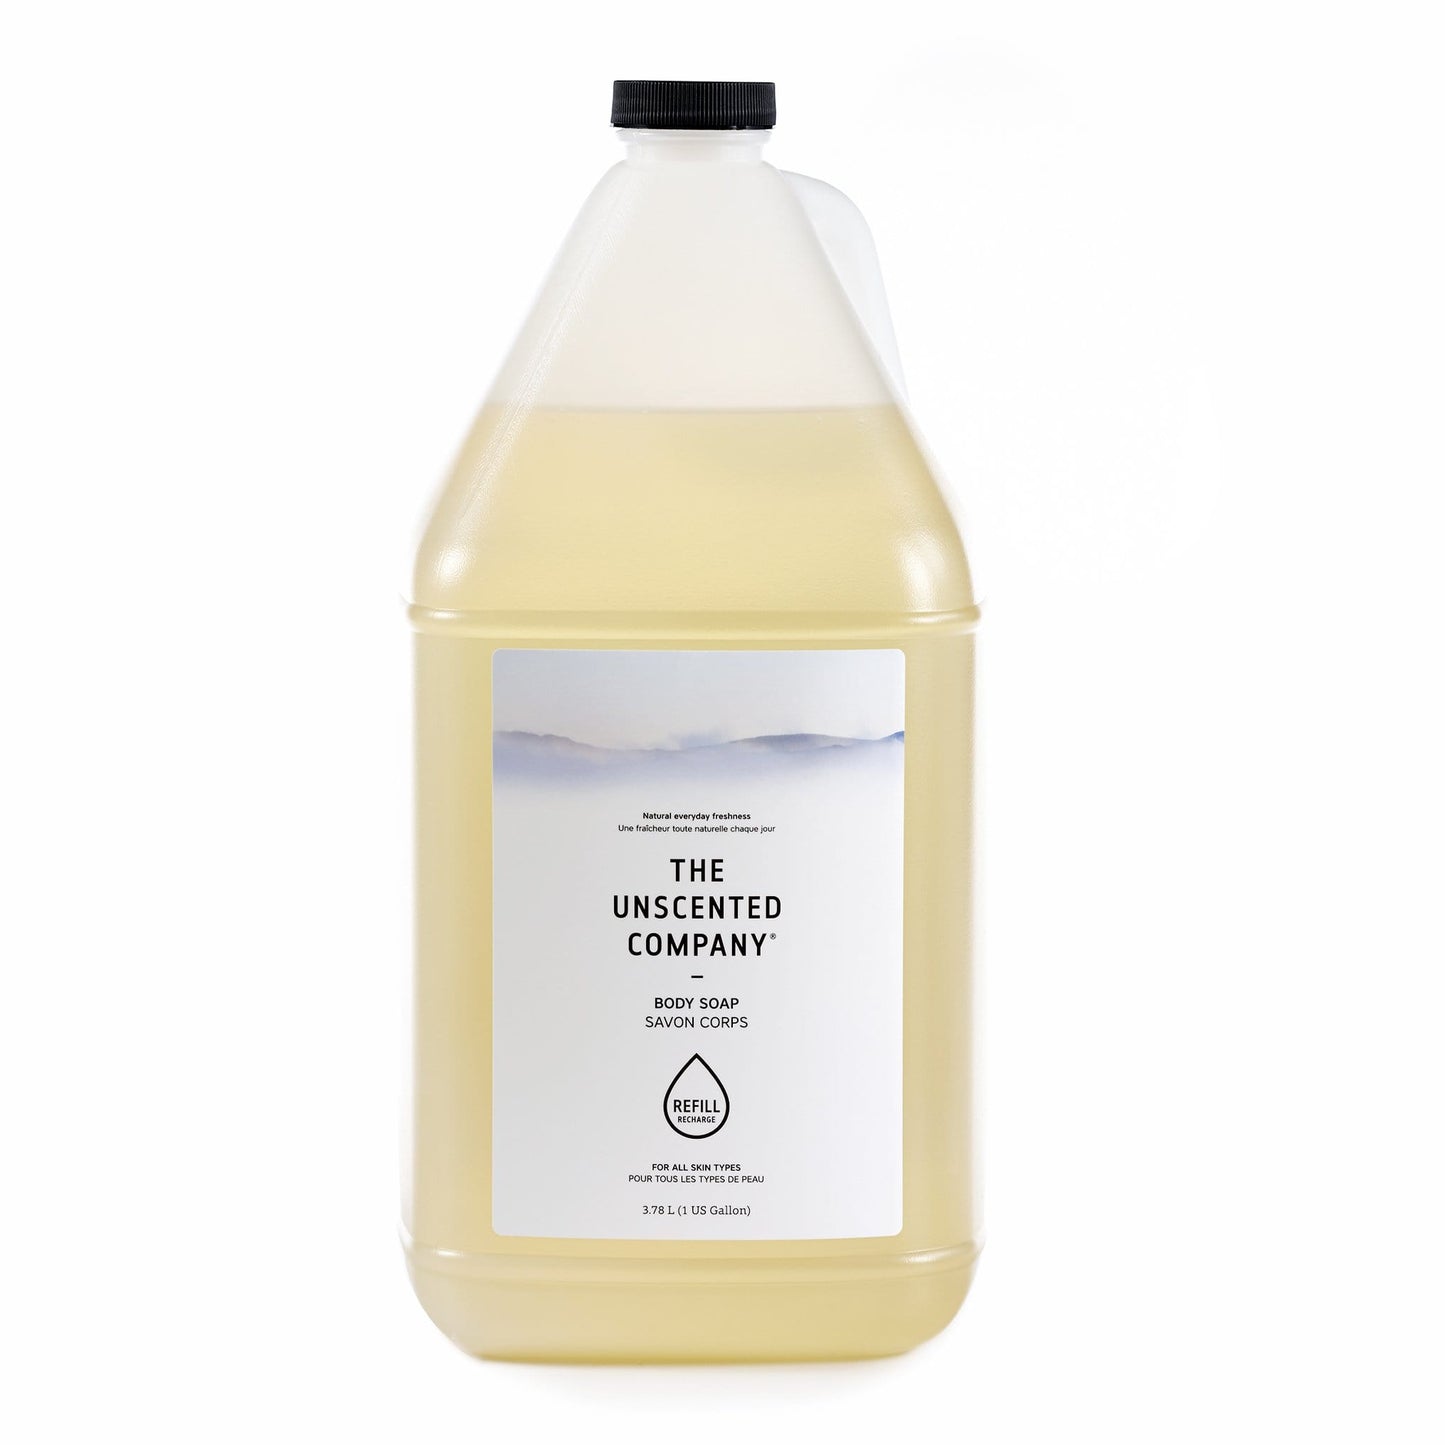 The Unscented Company - Body Soap - 3.78L Refill Bottle